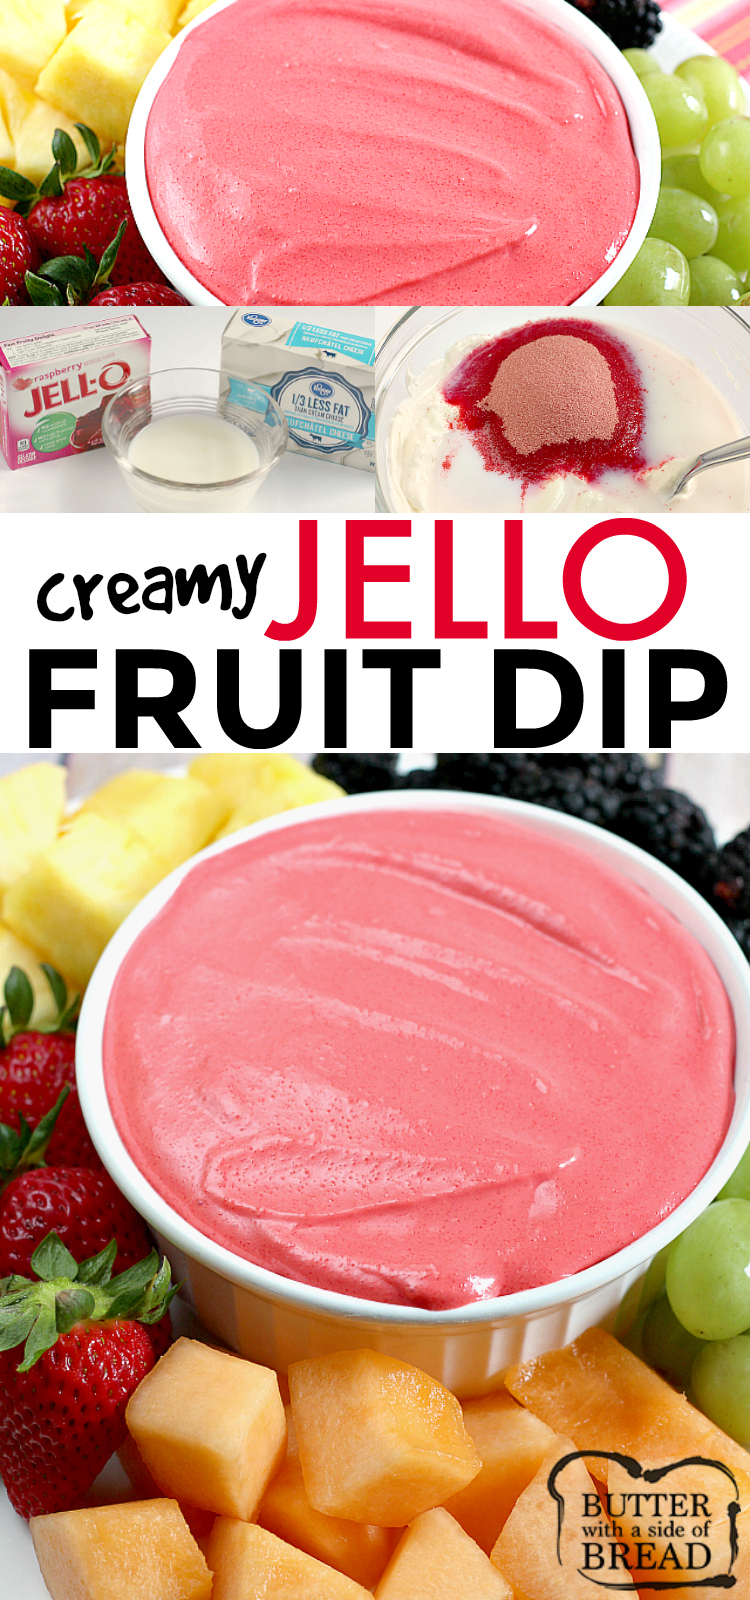 Creamy Jello Fruit Dip is made with jello, cream cheese and milk - that's it! You can use any flavor of jello that you want in this delicious fruit dip recipe!